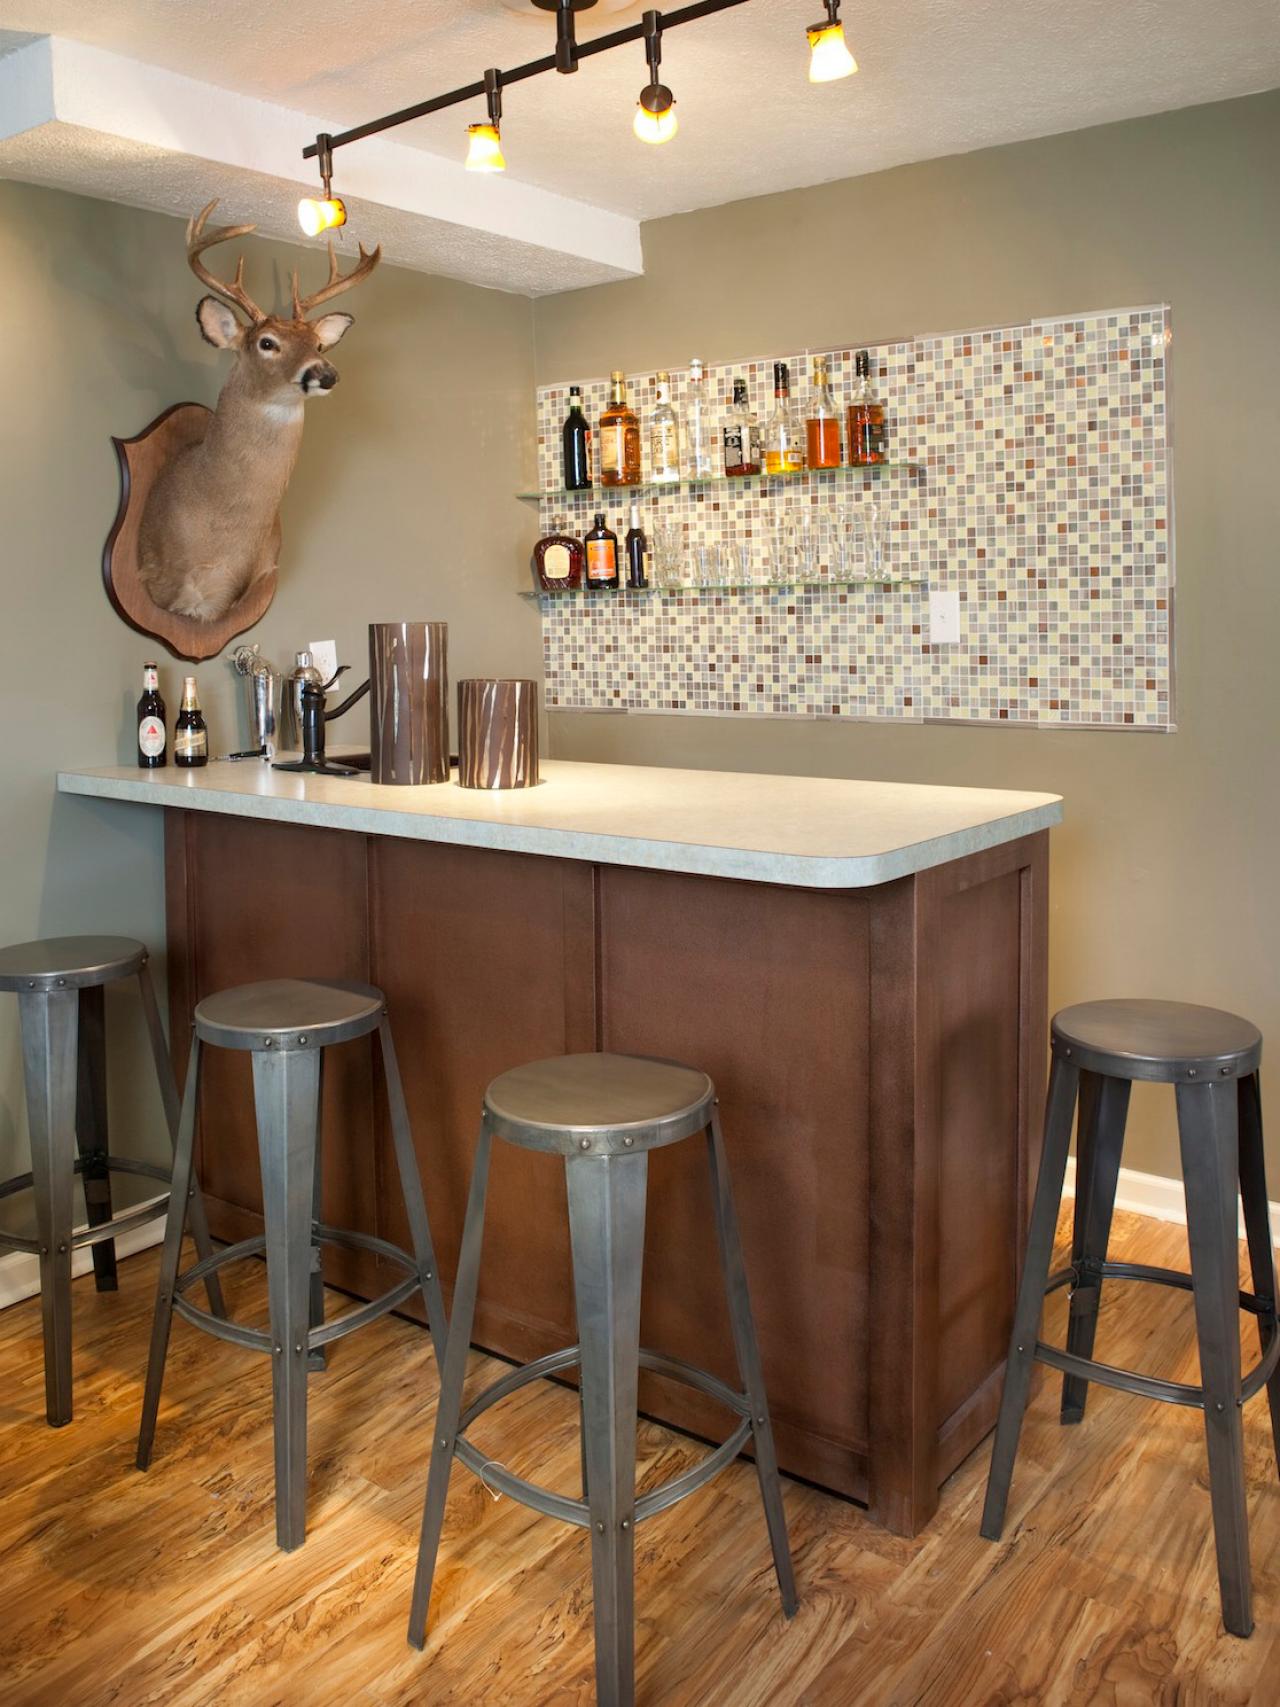 Basement Bar Ideas and Designs: Pictures, Options & Tips | HGTV